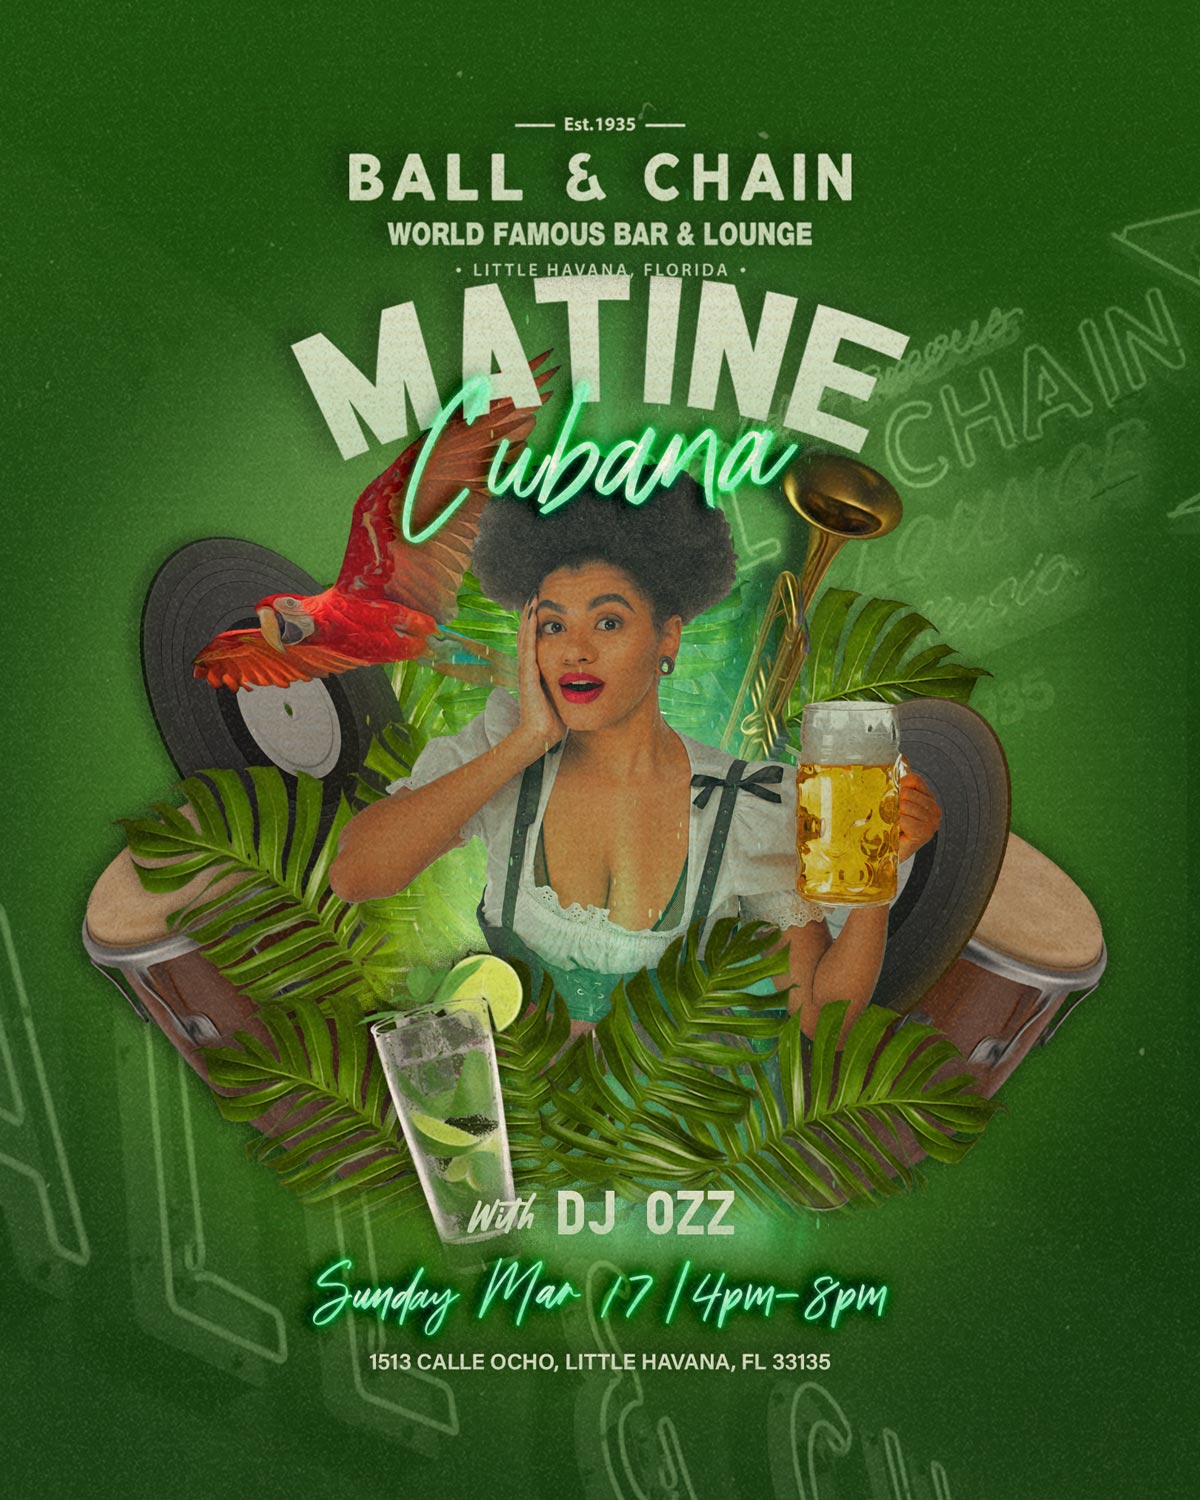 St- Patricks themed flyer for Matine Cuban